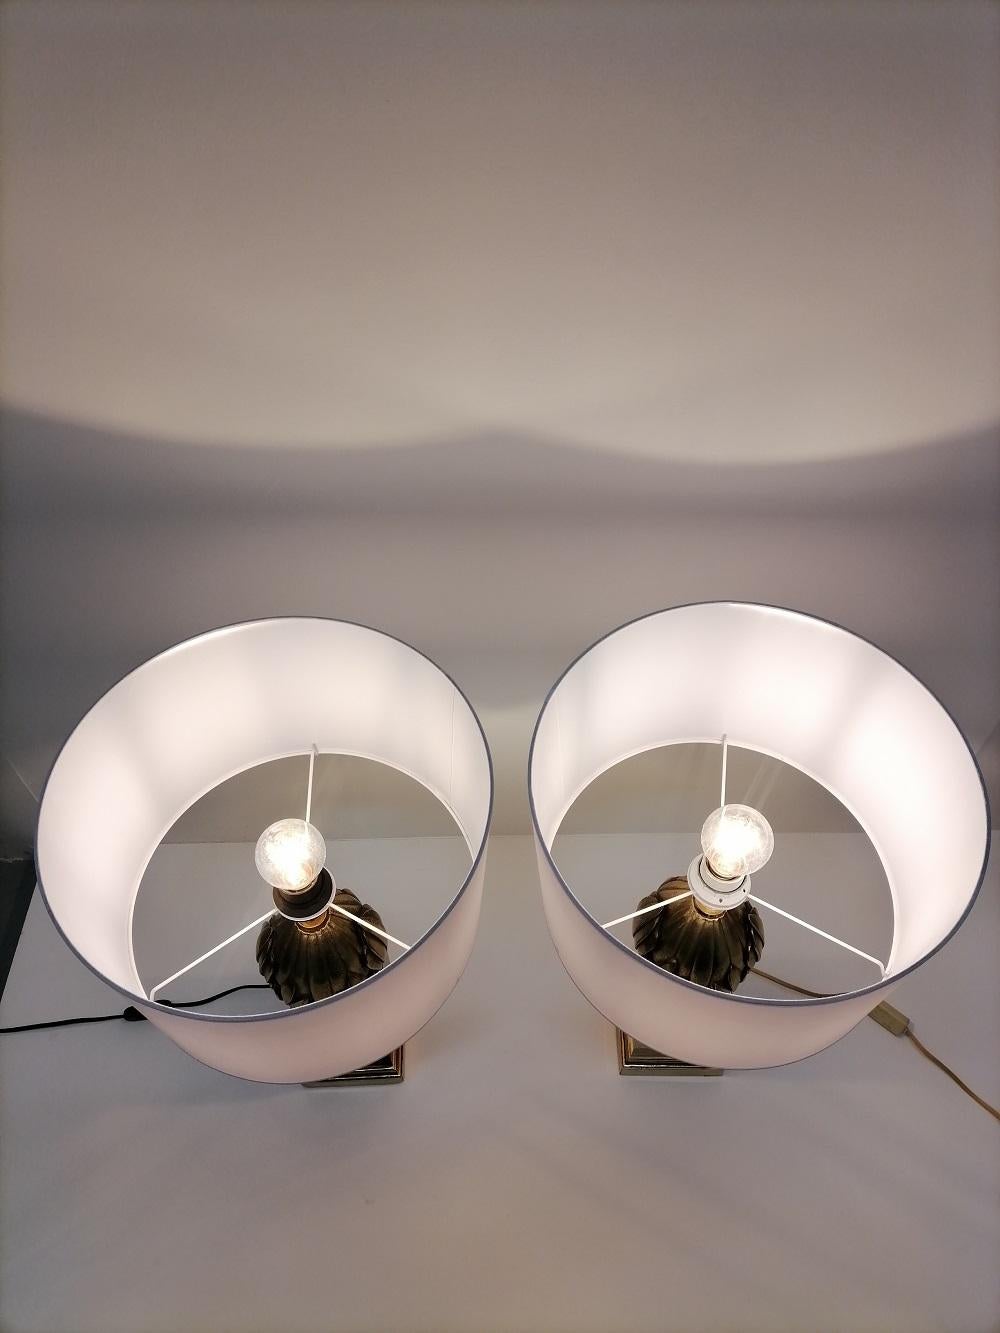 1970 French Midcentury Pair of Table Lamps in Maison Charles Style For Sale 4